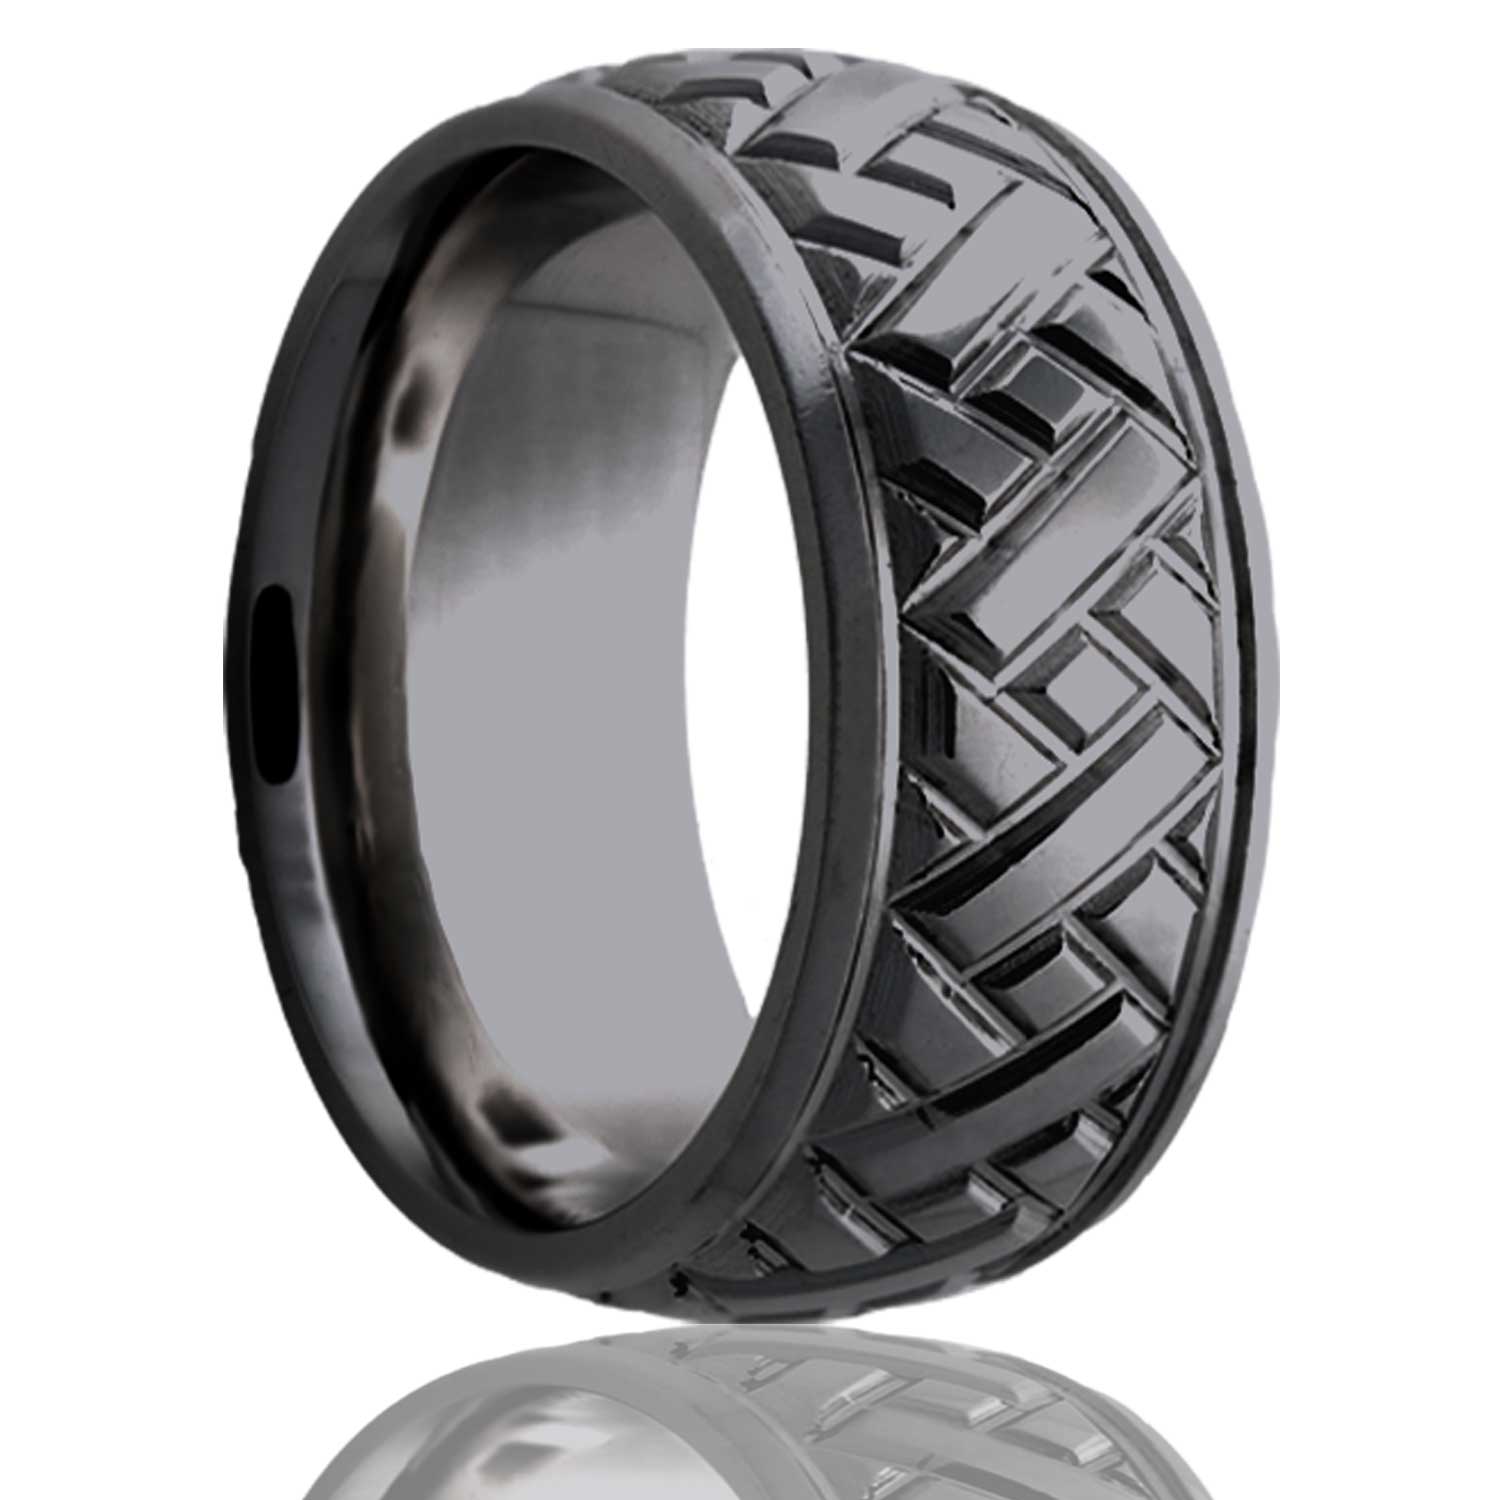 A grooved diagonal pattern domed zirconium men's wedding band displayed on a neutral white background.